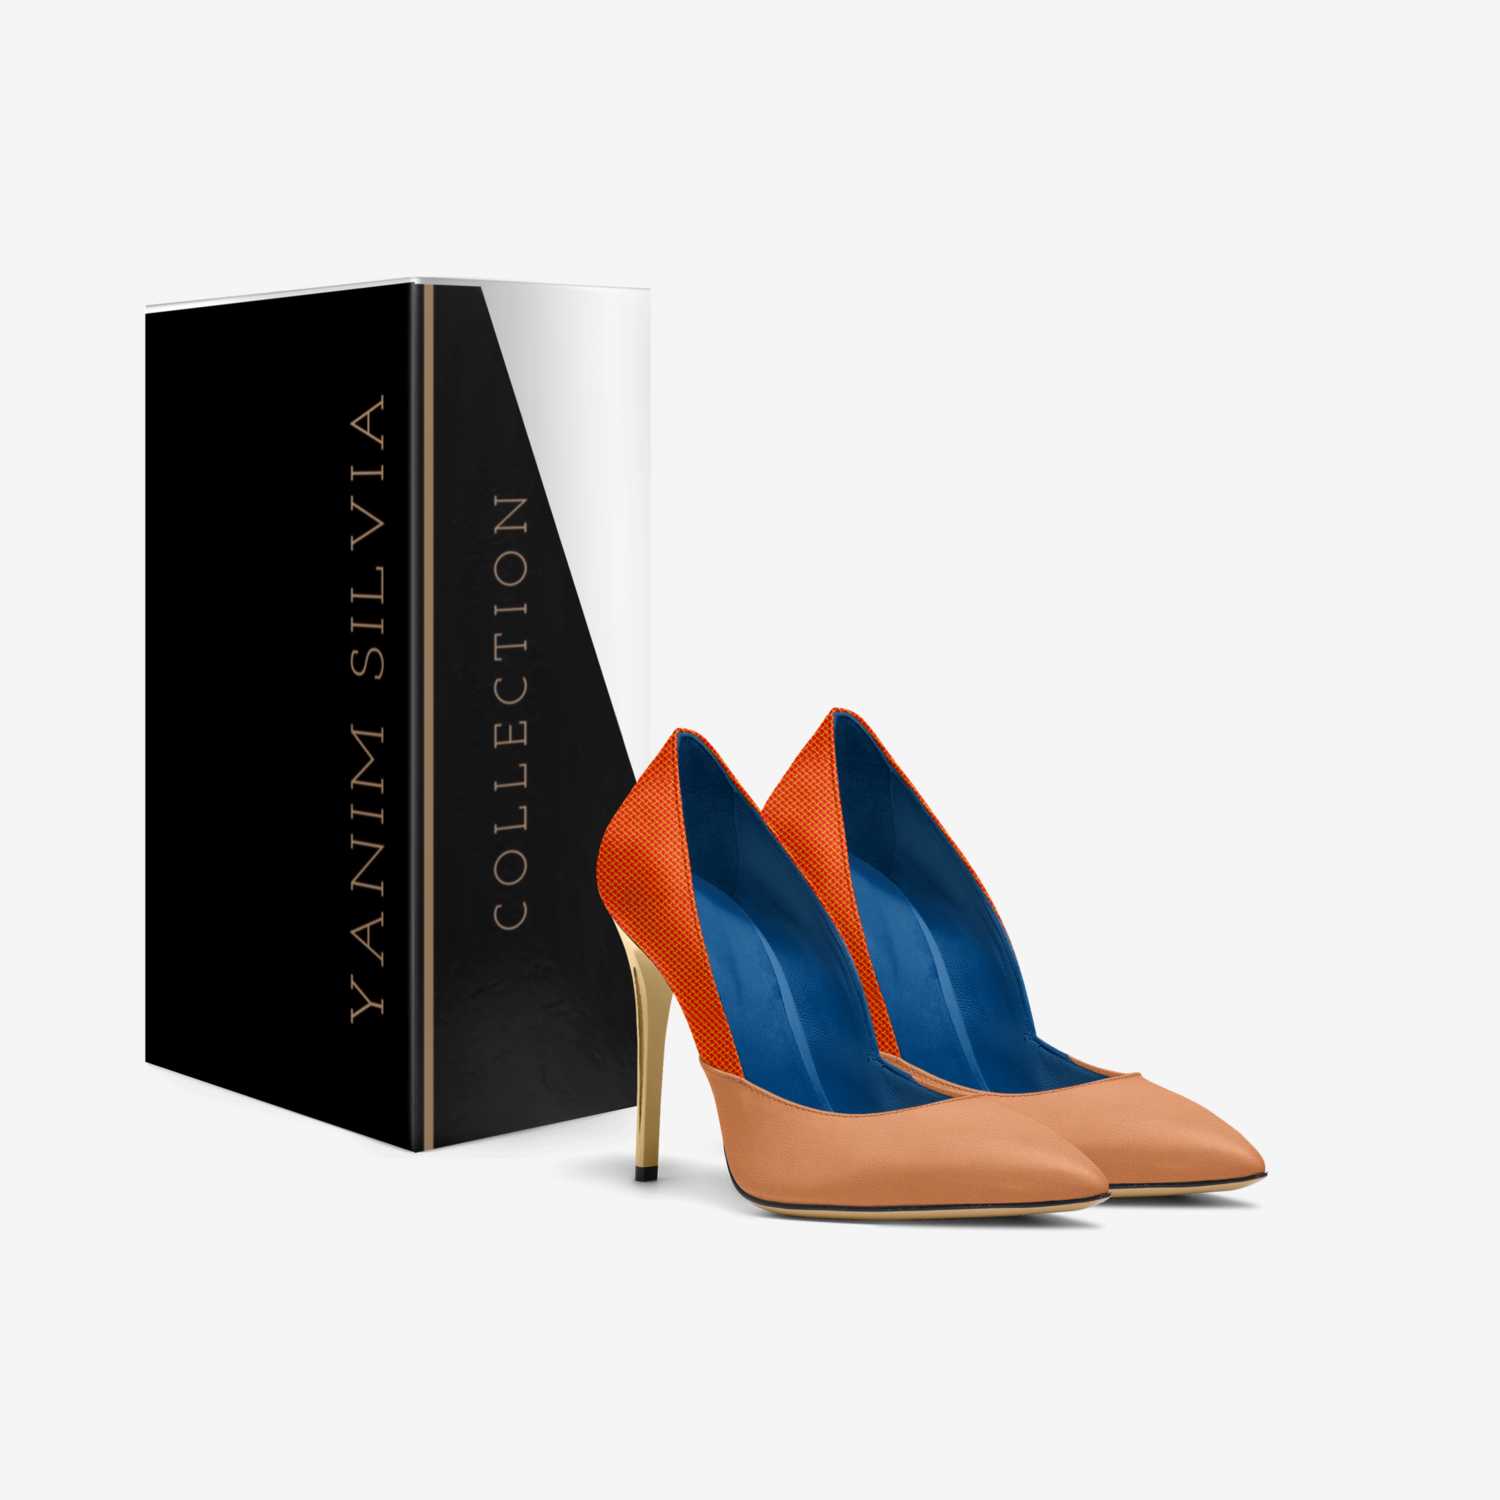 Leidi Luly custom made in Italy shoes by Yanim Silvia | Box view